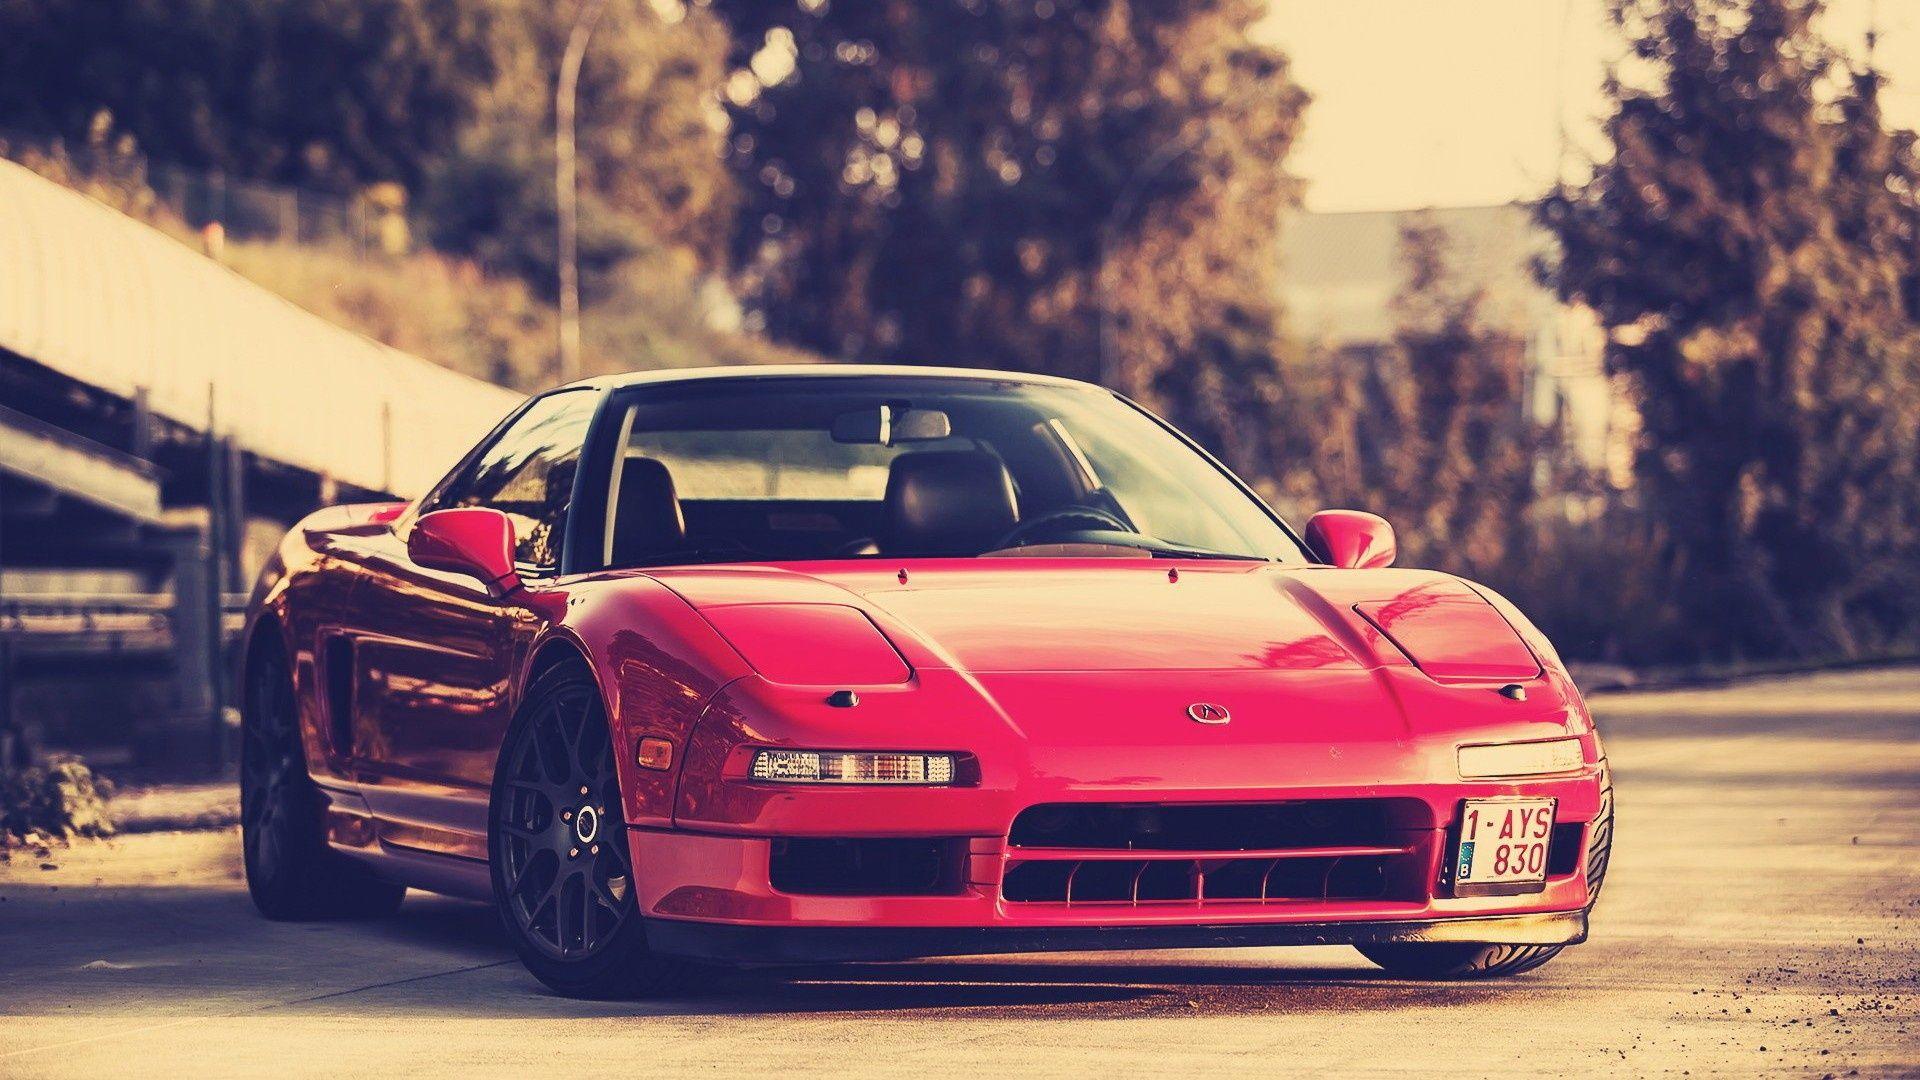 Honda Nsx Wallpapers High Resolution And Quality Downloadhonda - Honda Nsx Wallpaper Hd , HD Wallpaper & Backgrounds